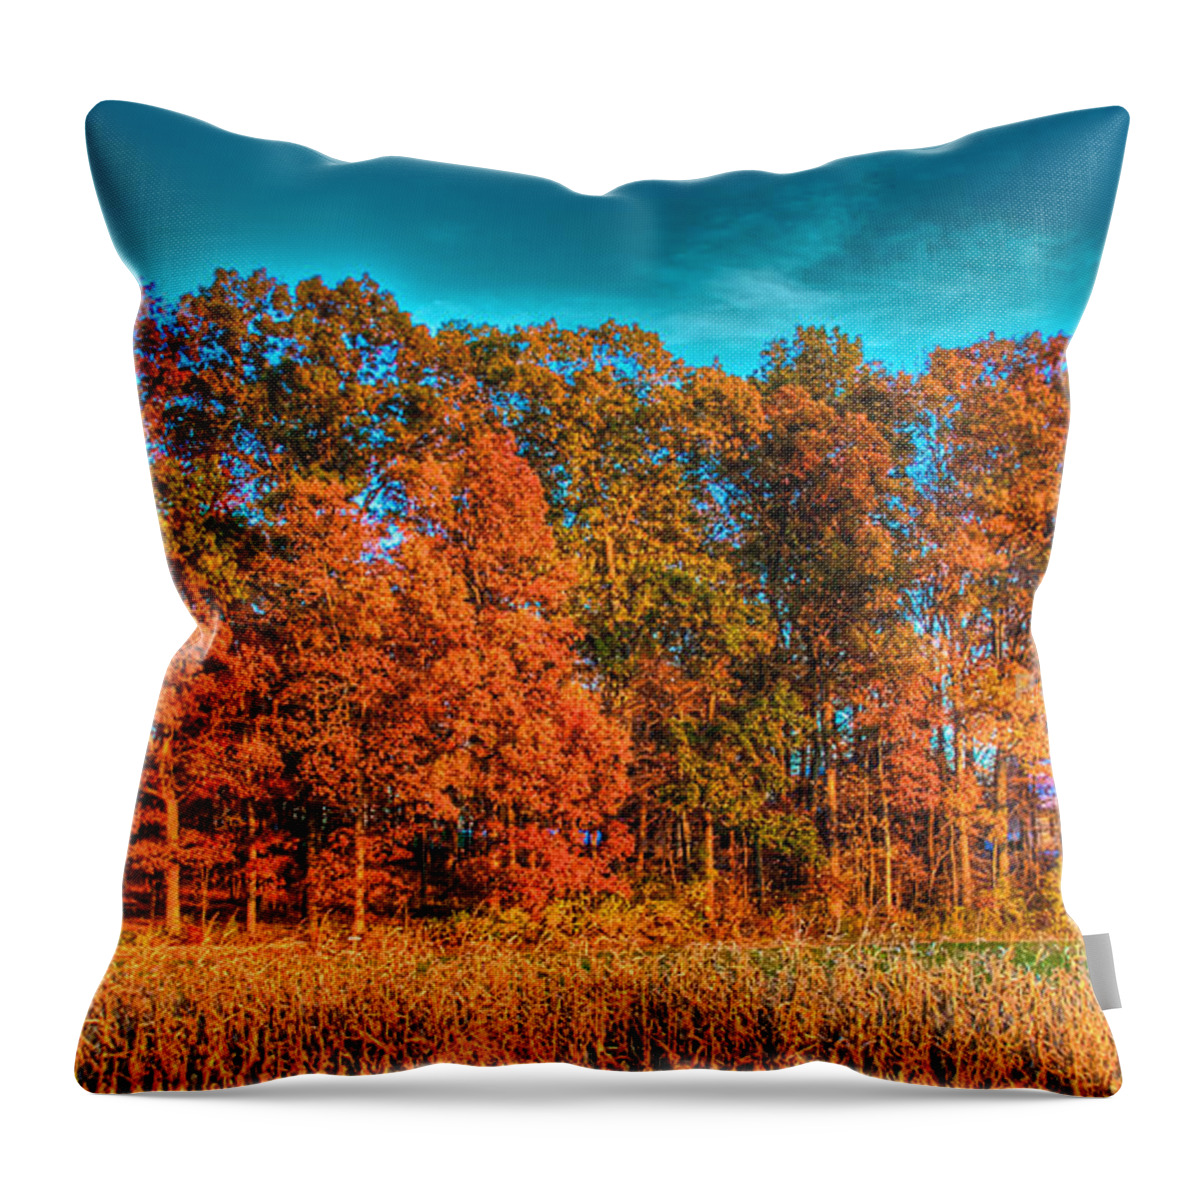 Tonemapped Throw Pillow featuring the photograph Fall Beauty by Mark Dodd